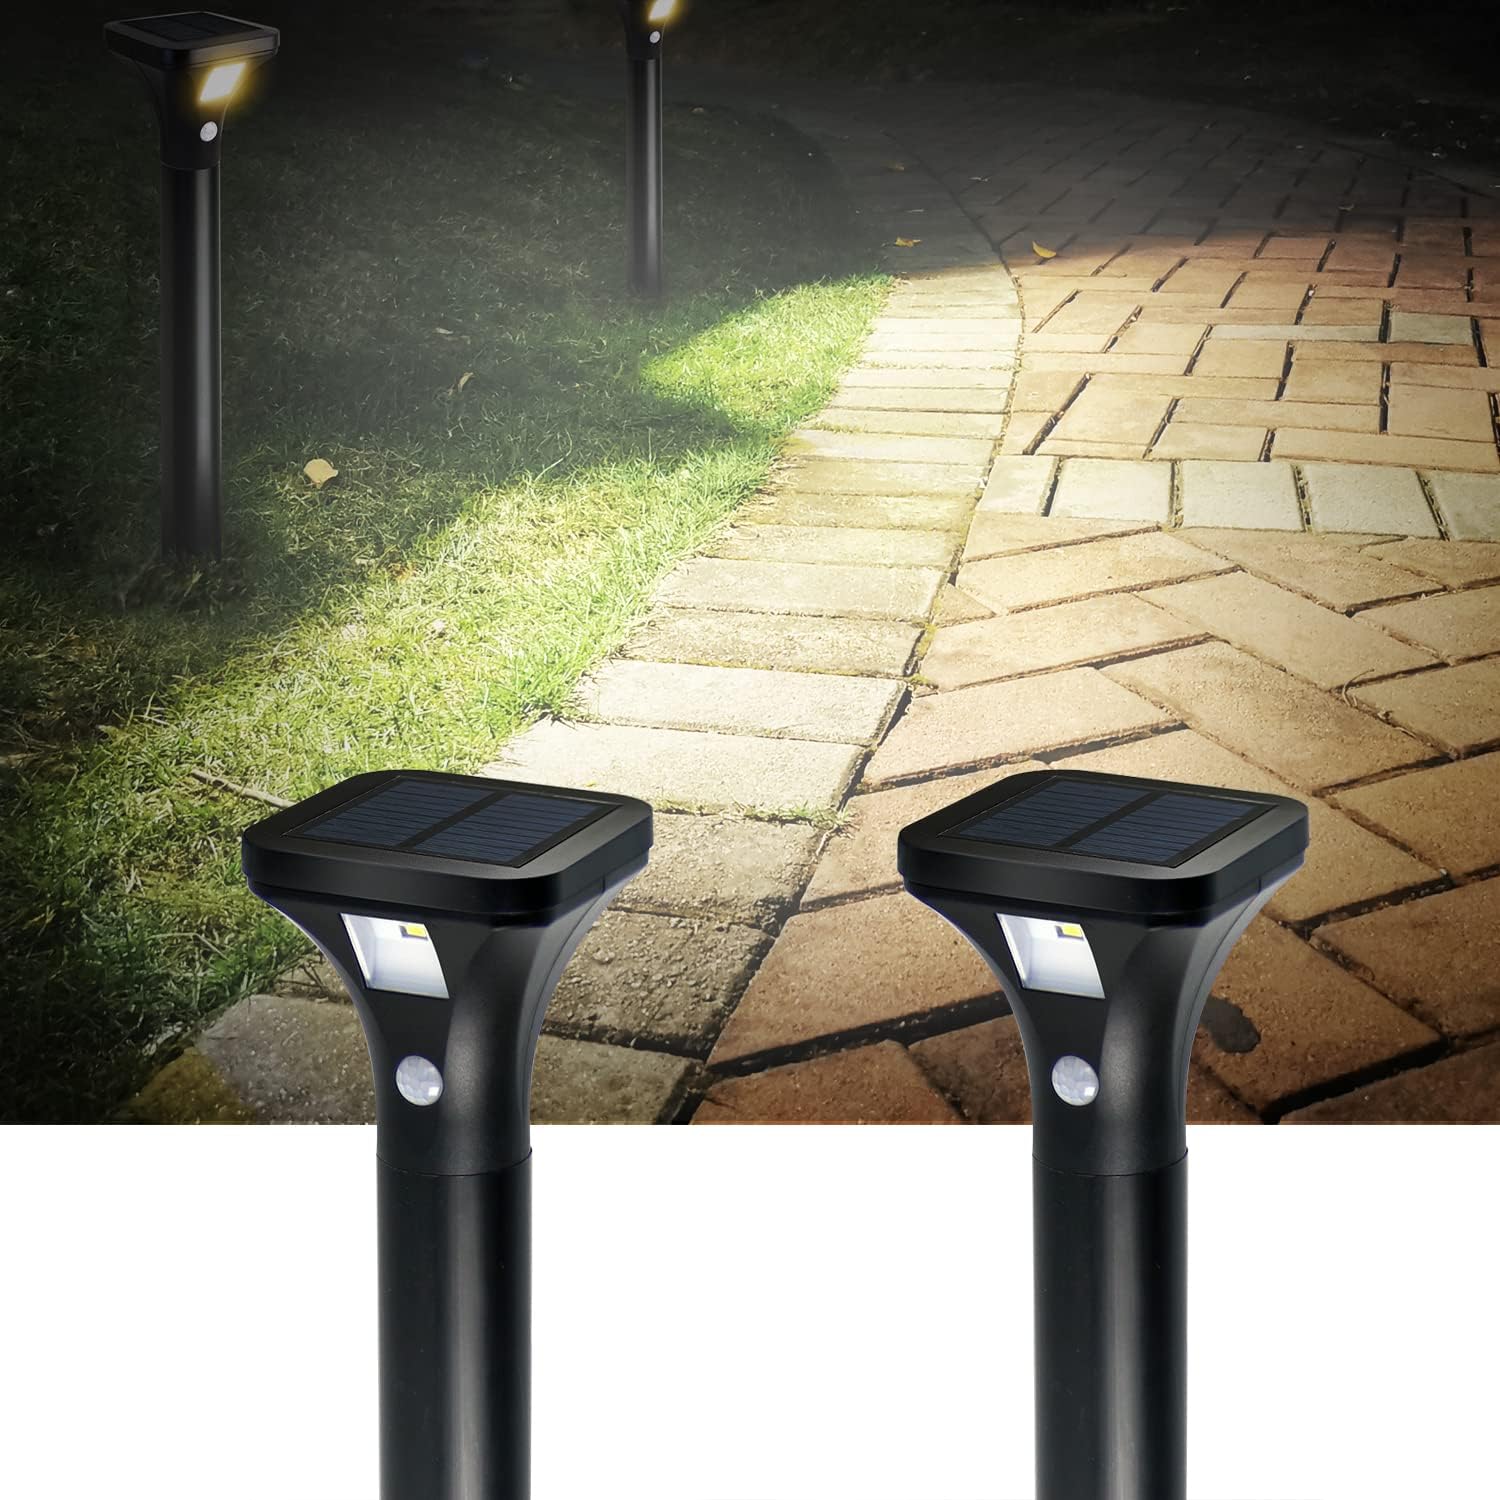 AURAXY LED Pathway Lights Review